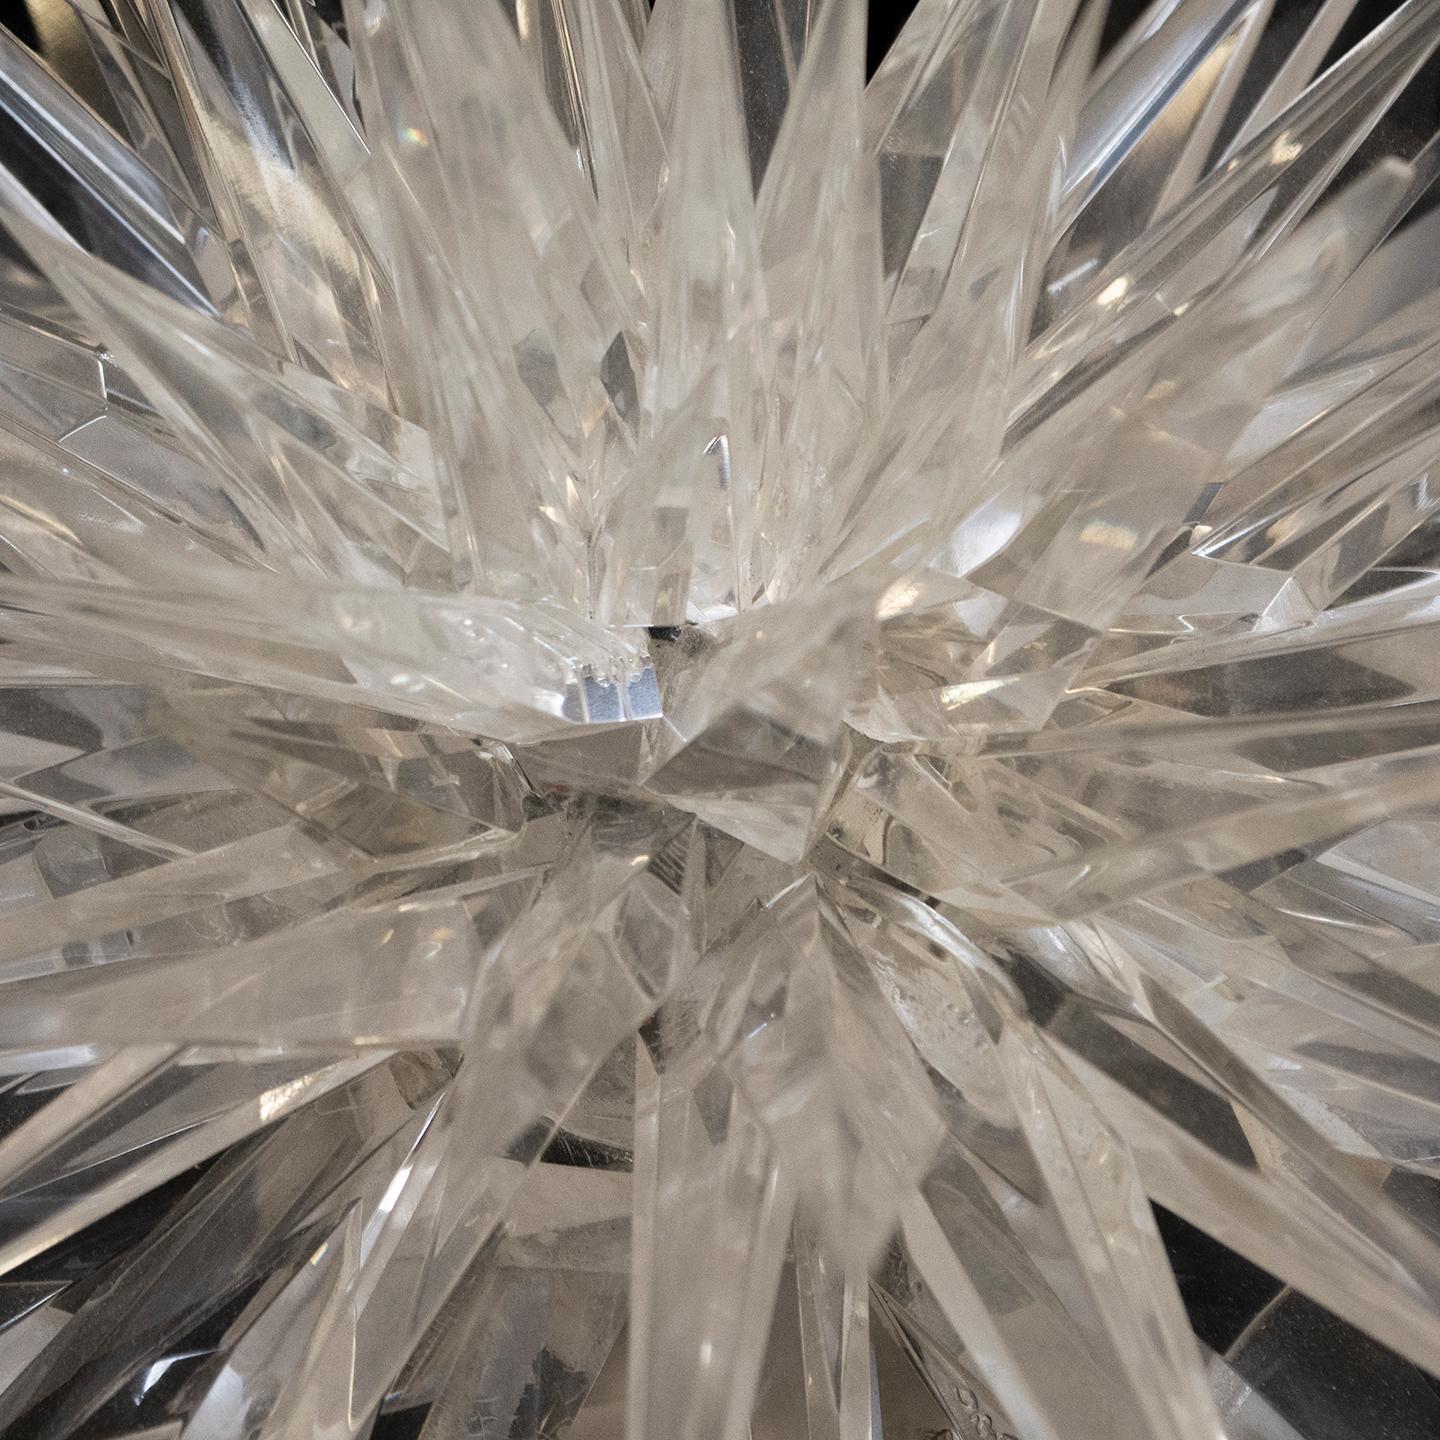 This gorgeous hand-carved and polished crystal star was created by the American artist Mark Yurkiw for brochure photography. Today, it would lend itself well as a centerpiece on a dining table or a console table. The design is reminiscent of the